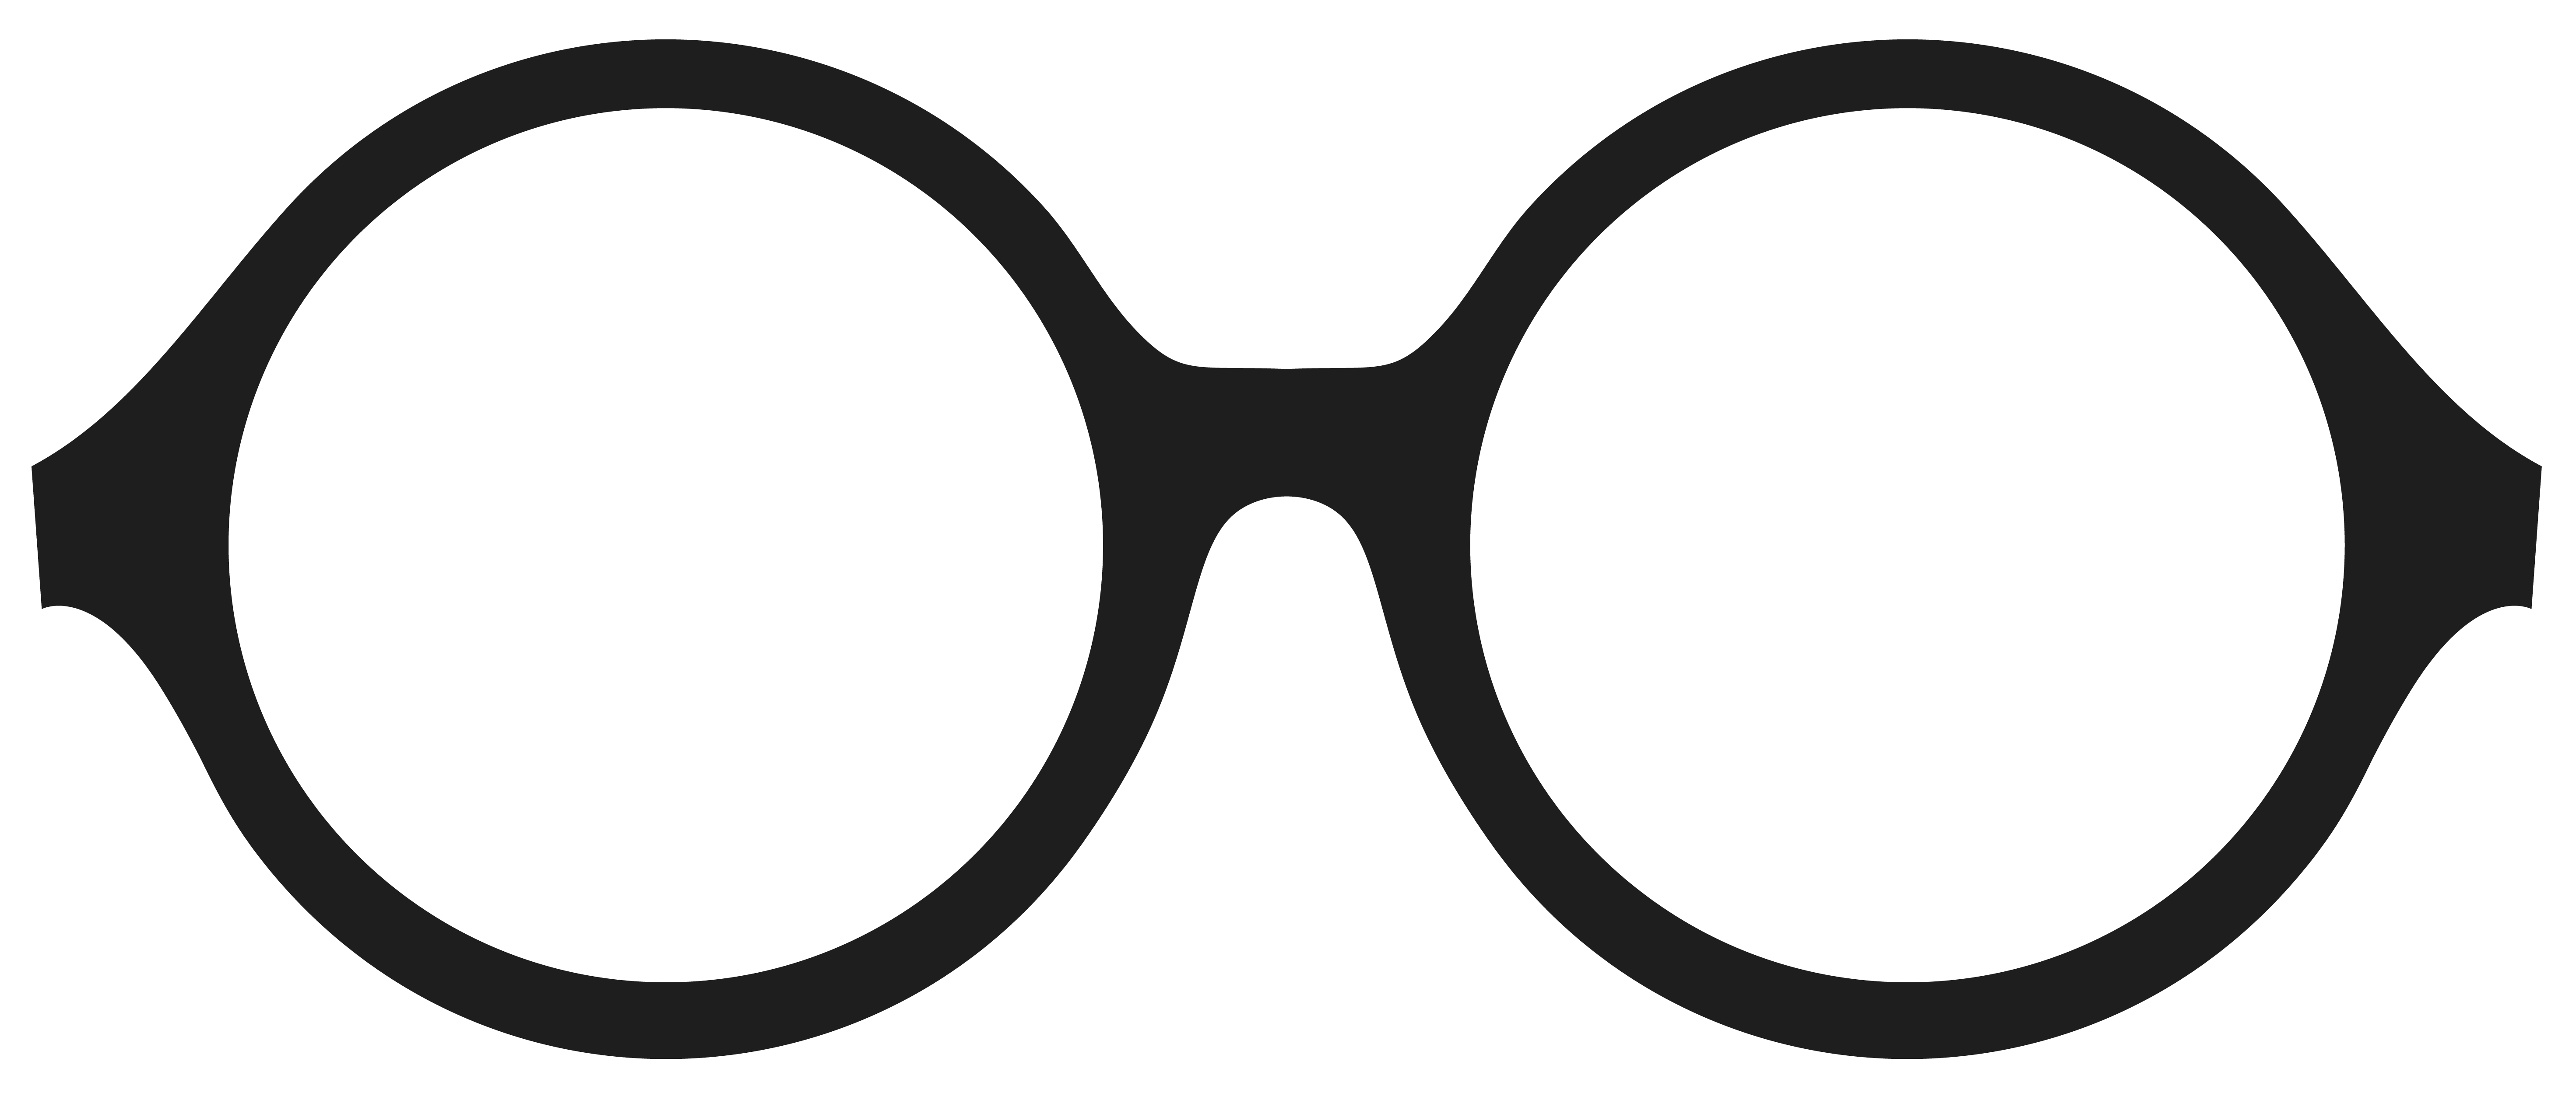 Glasses png images free. Sunglasses clipart small